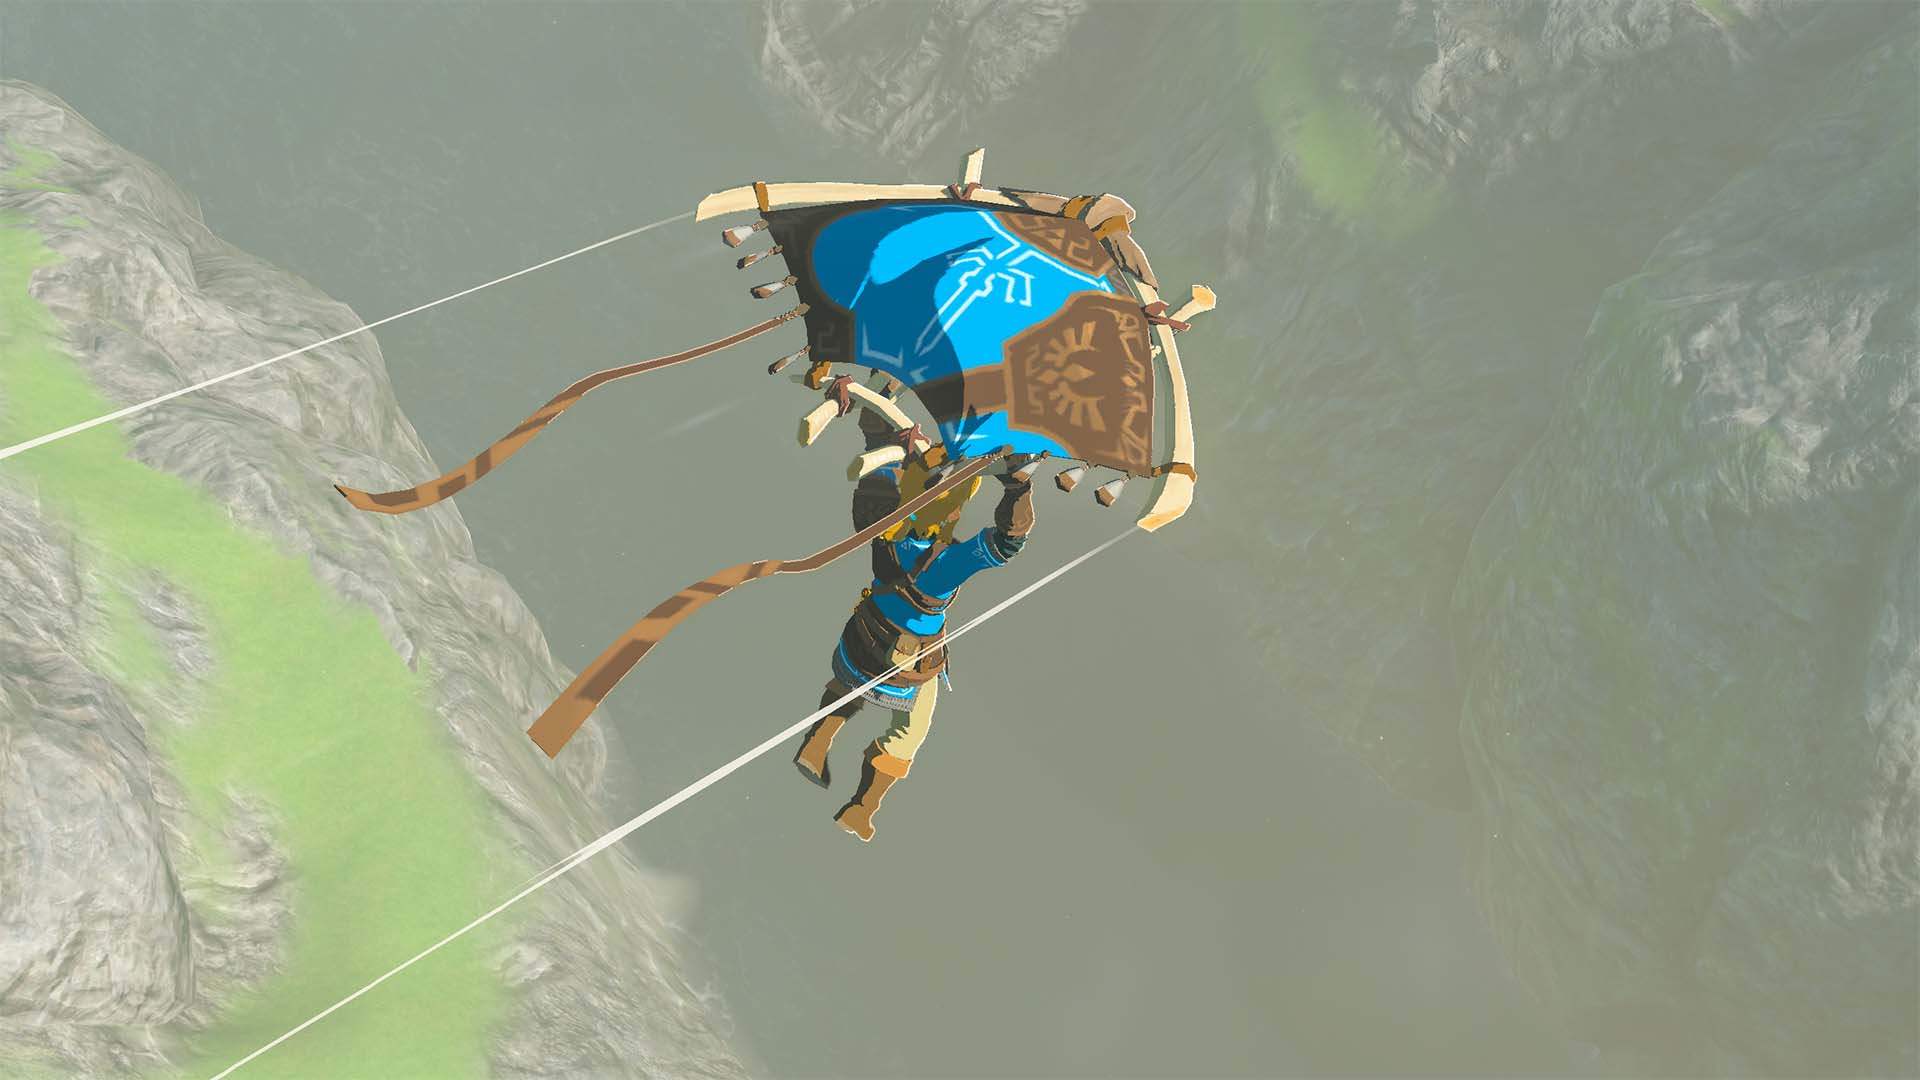 The Legend of Zelda: Breath of the Wild recreated with Google Maps